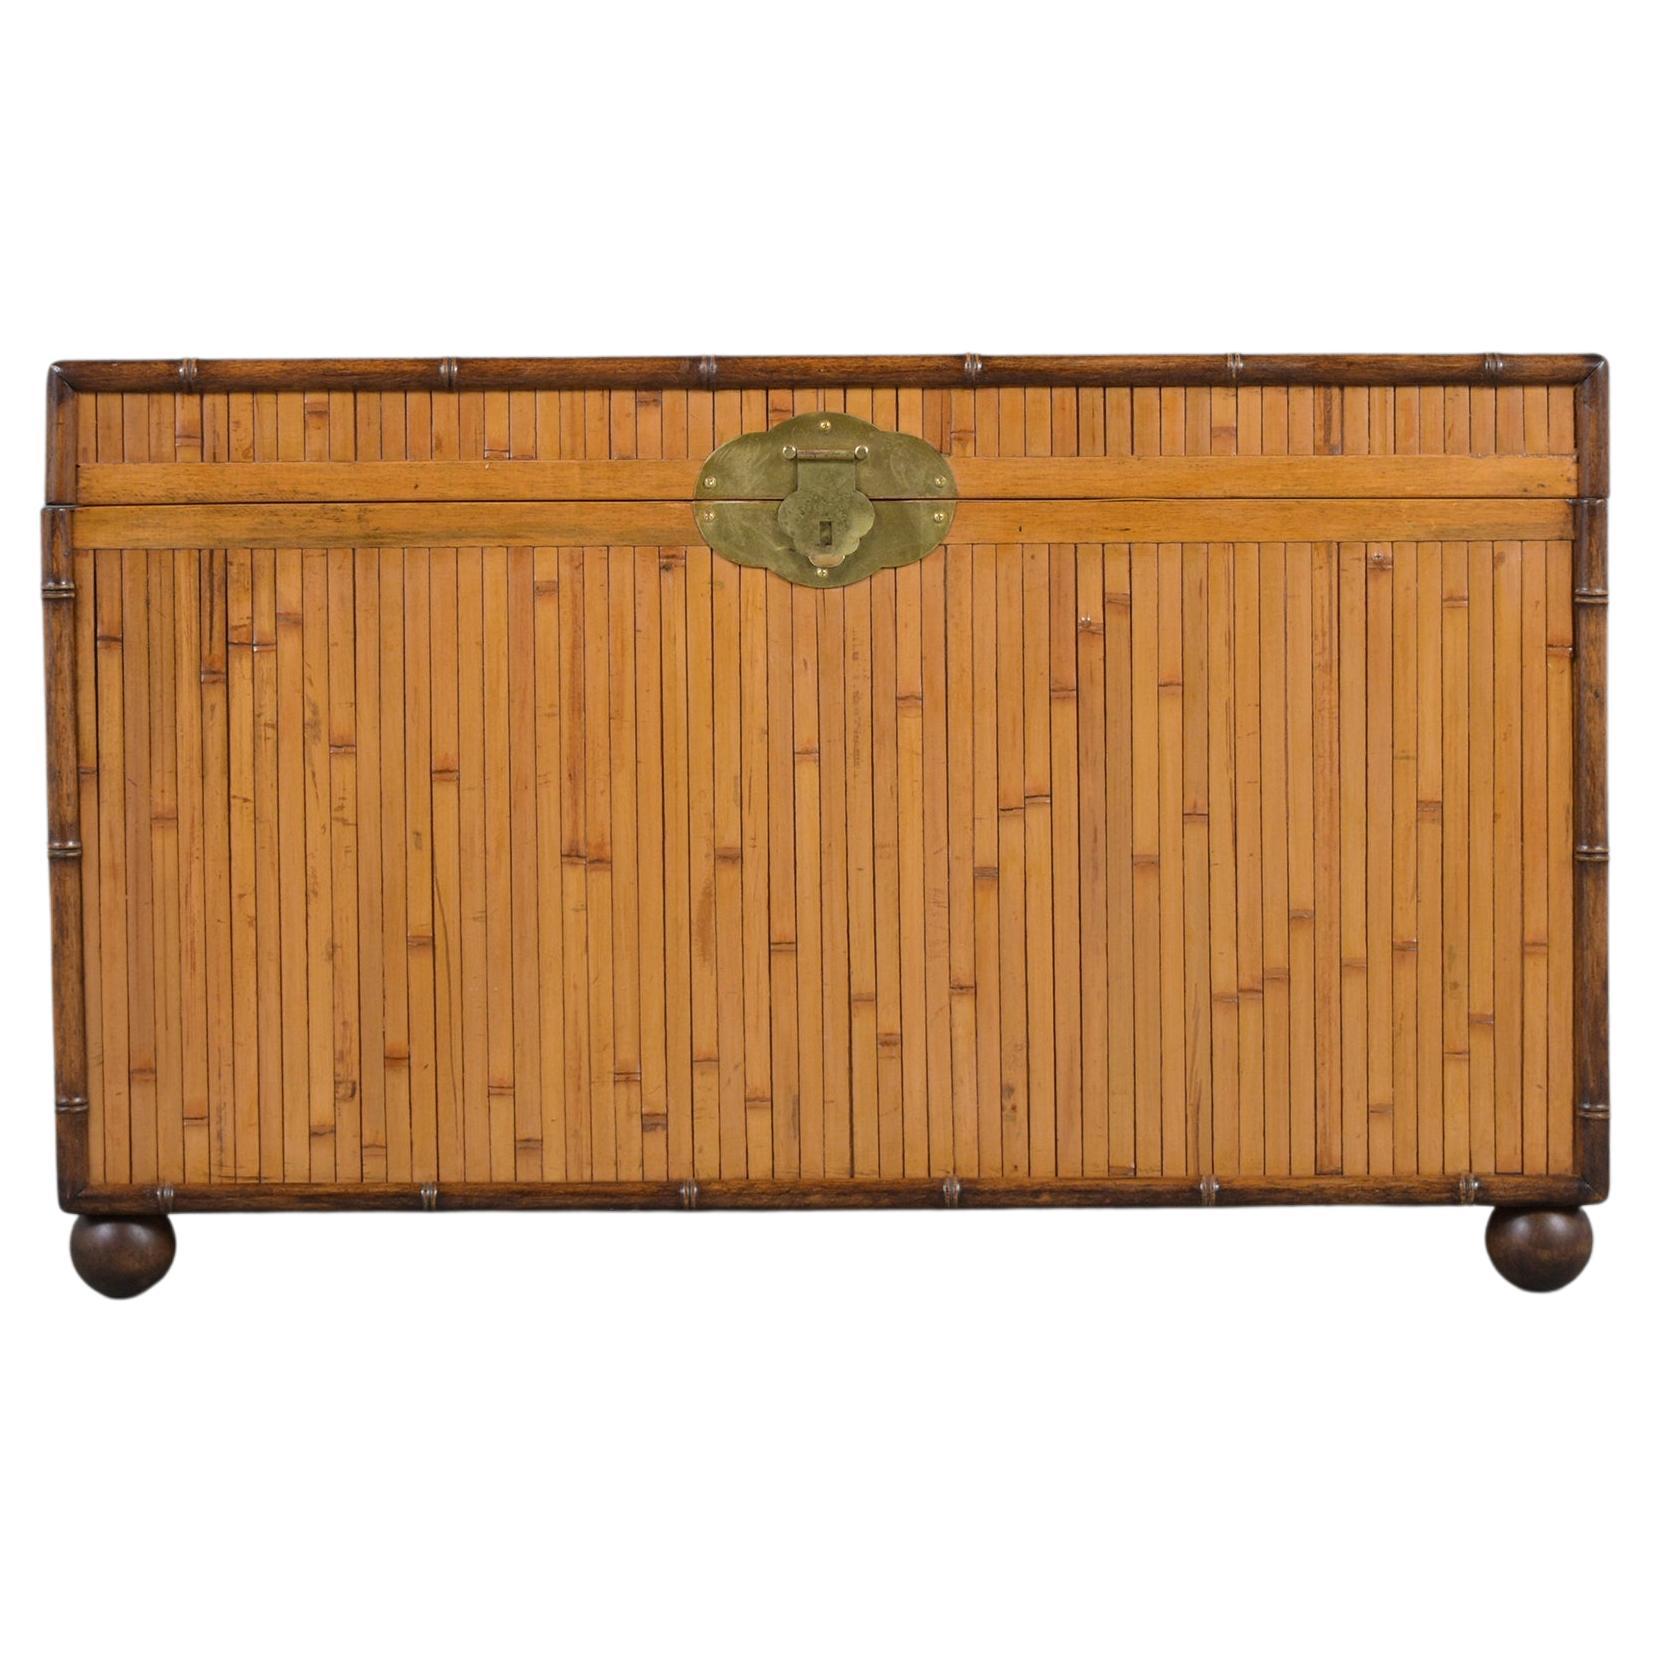 An extraordinary 1980s trunk crafted out of bamboo and wood is in a good condition and covered in bamboo featuring its original golden color and walnut finish. The trunk is newly shellacking, waxed, and polished developing a beautiful patina